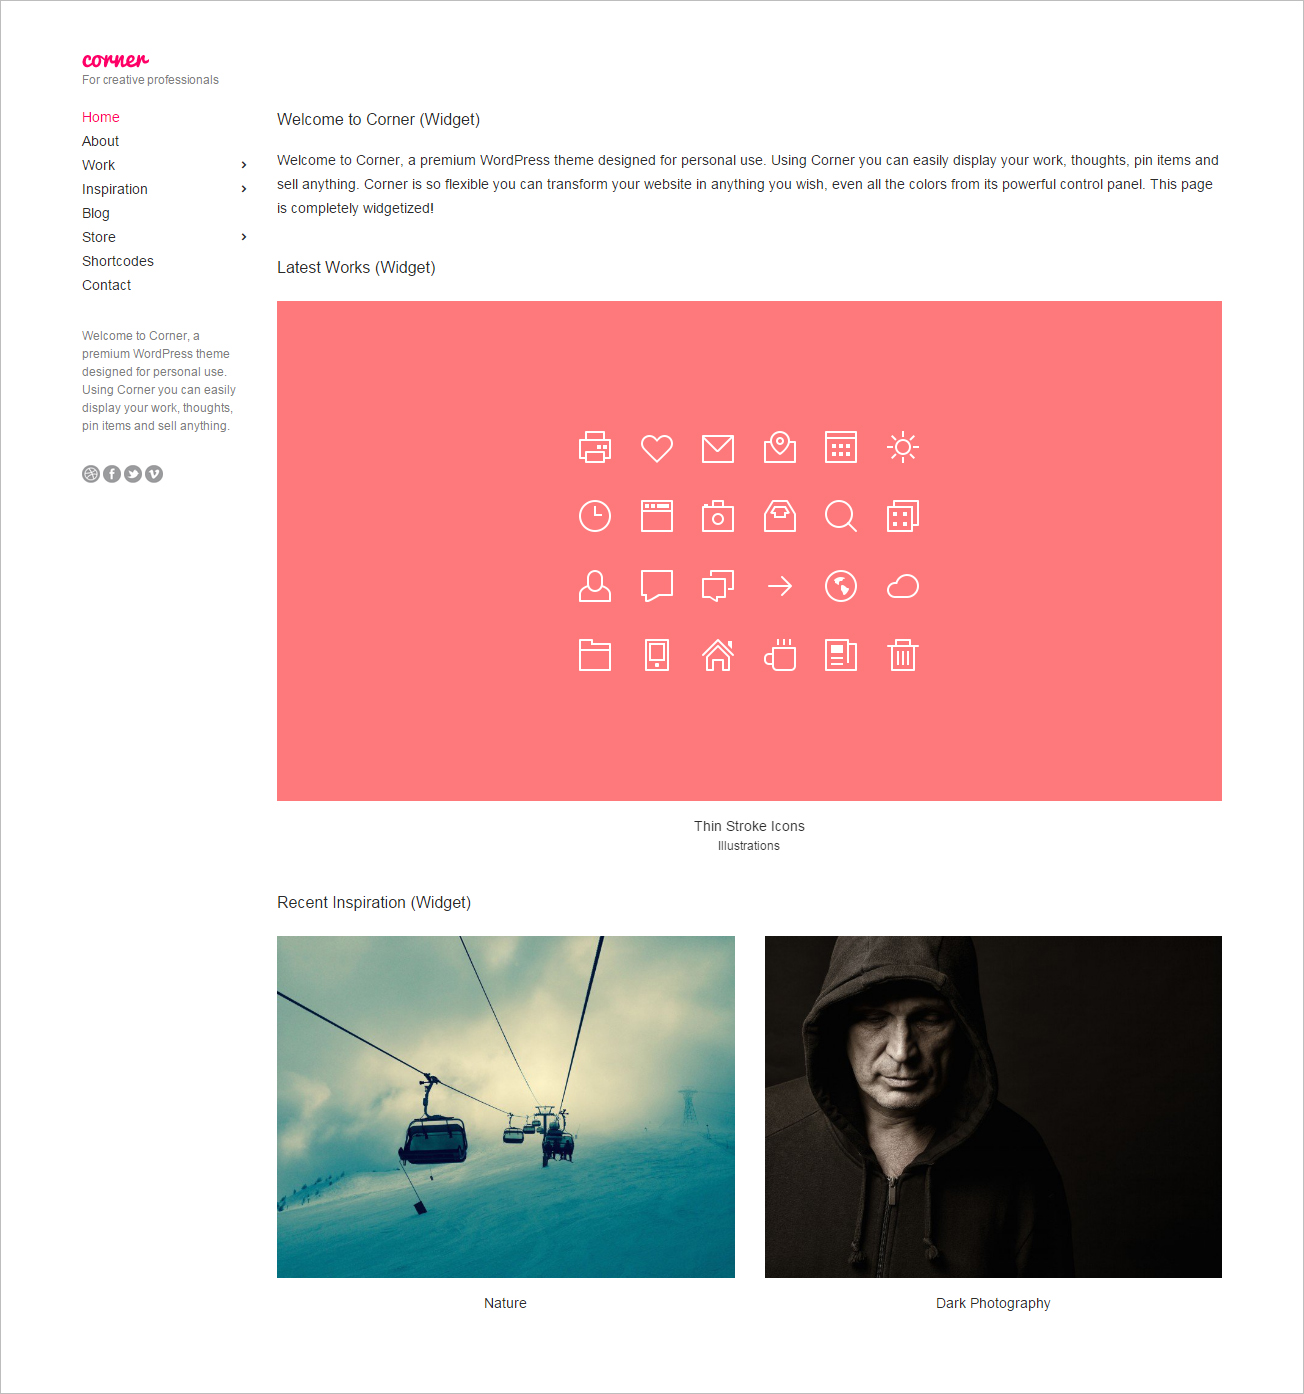 All-in-One WordPress Theme for Creative Professionals